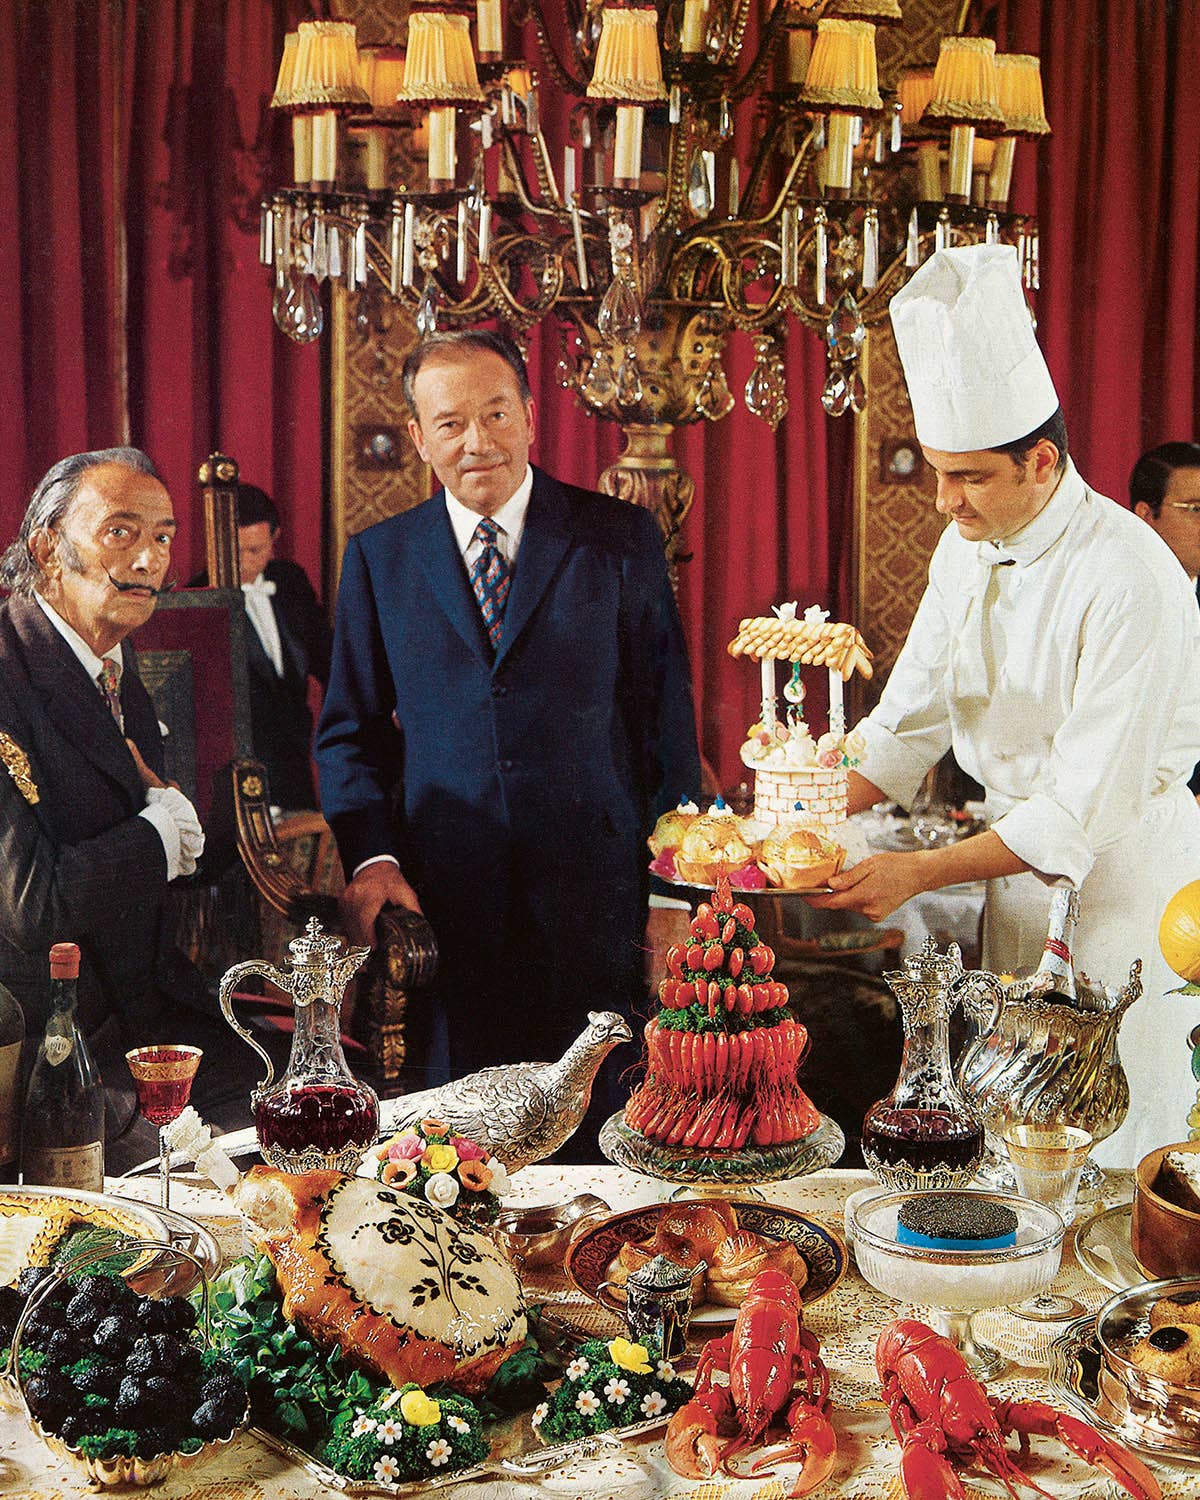 Salvador Dalí’s Surrealist Cookbook is Here for Your Acid-Fueled Dinner Parties